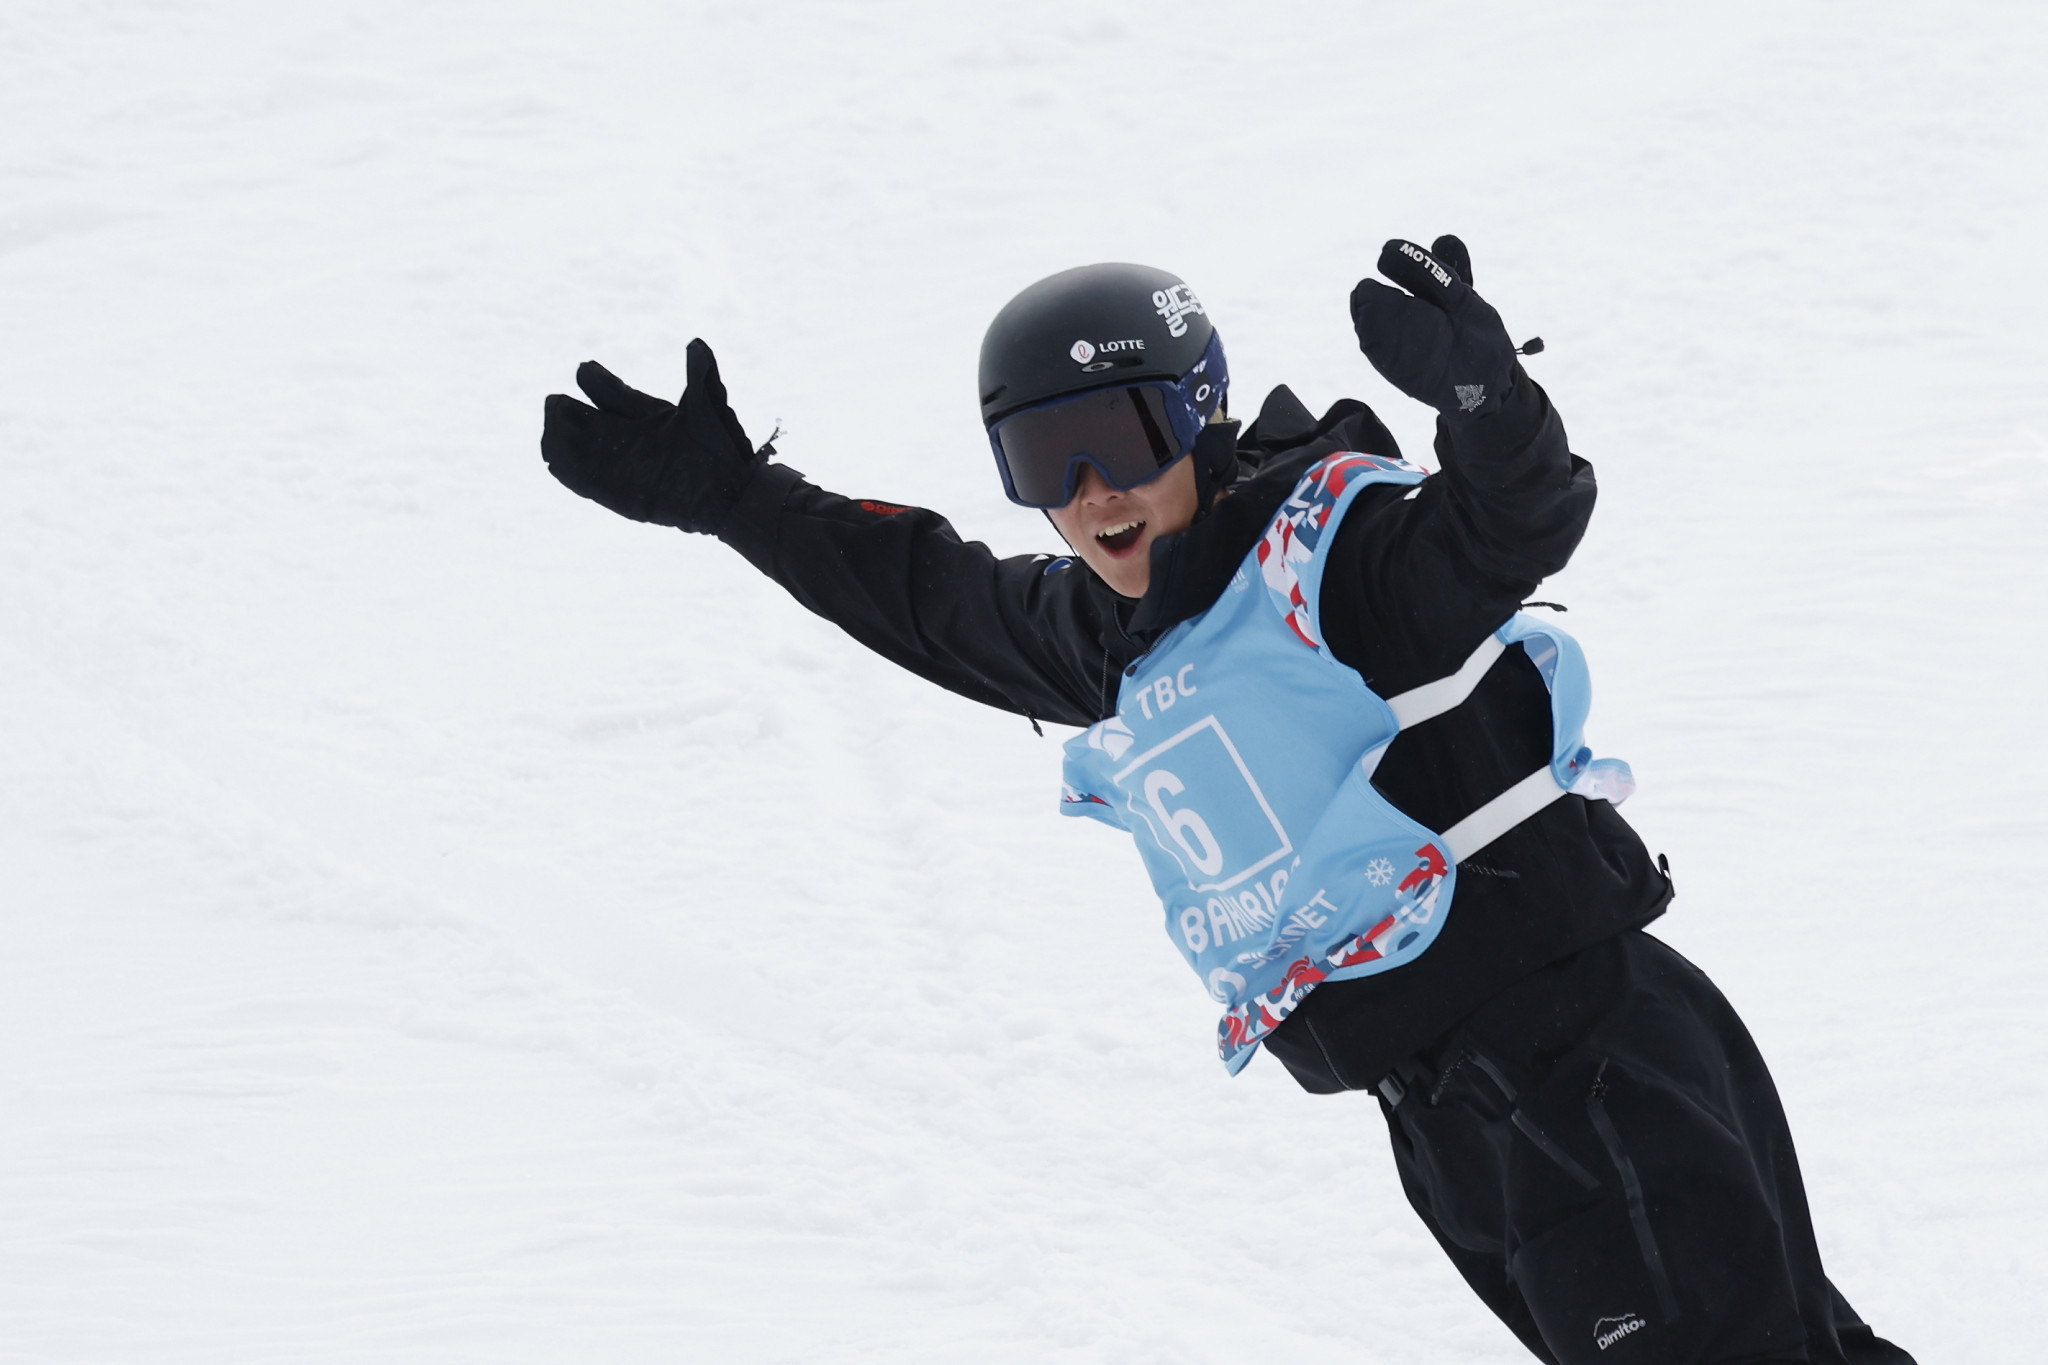 Lee becomes South Korea's first-ever snowboard world champion in Bakuriani